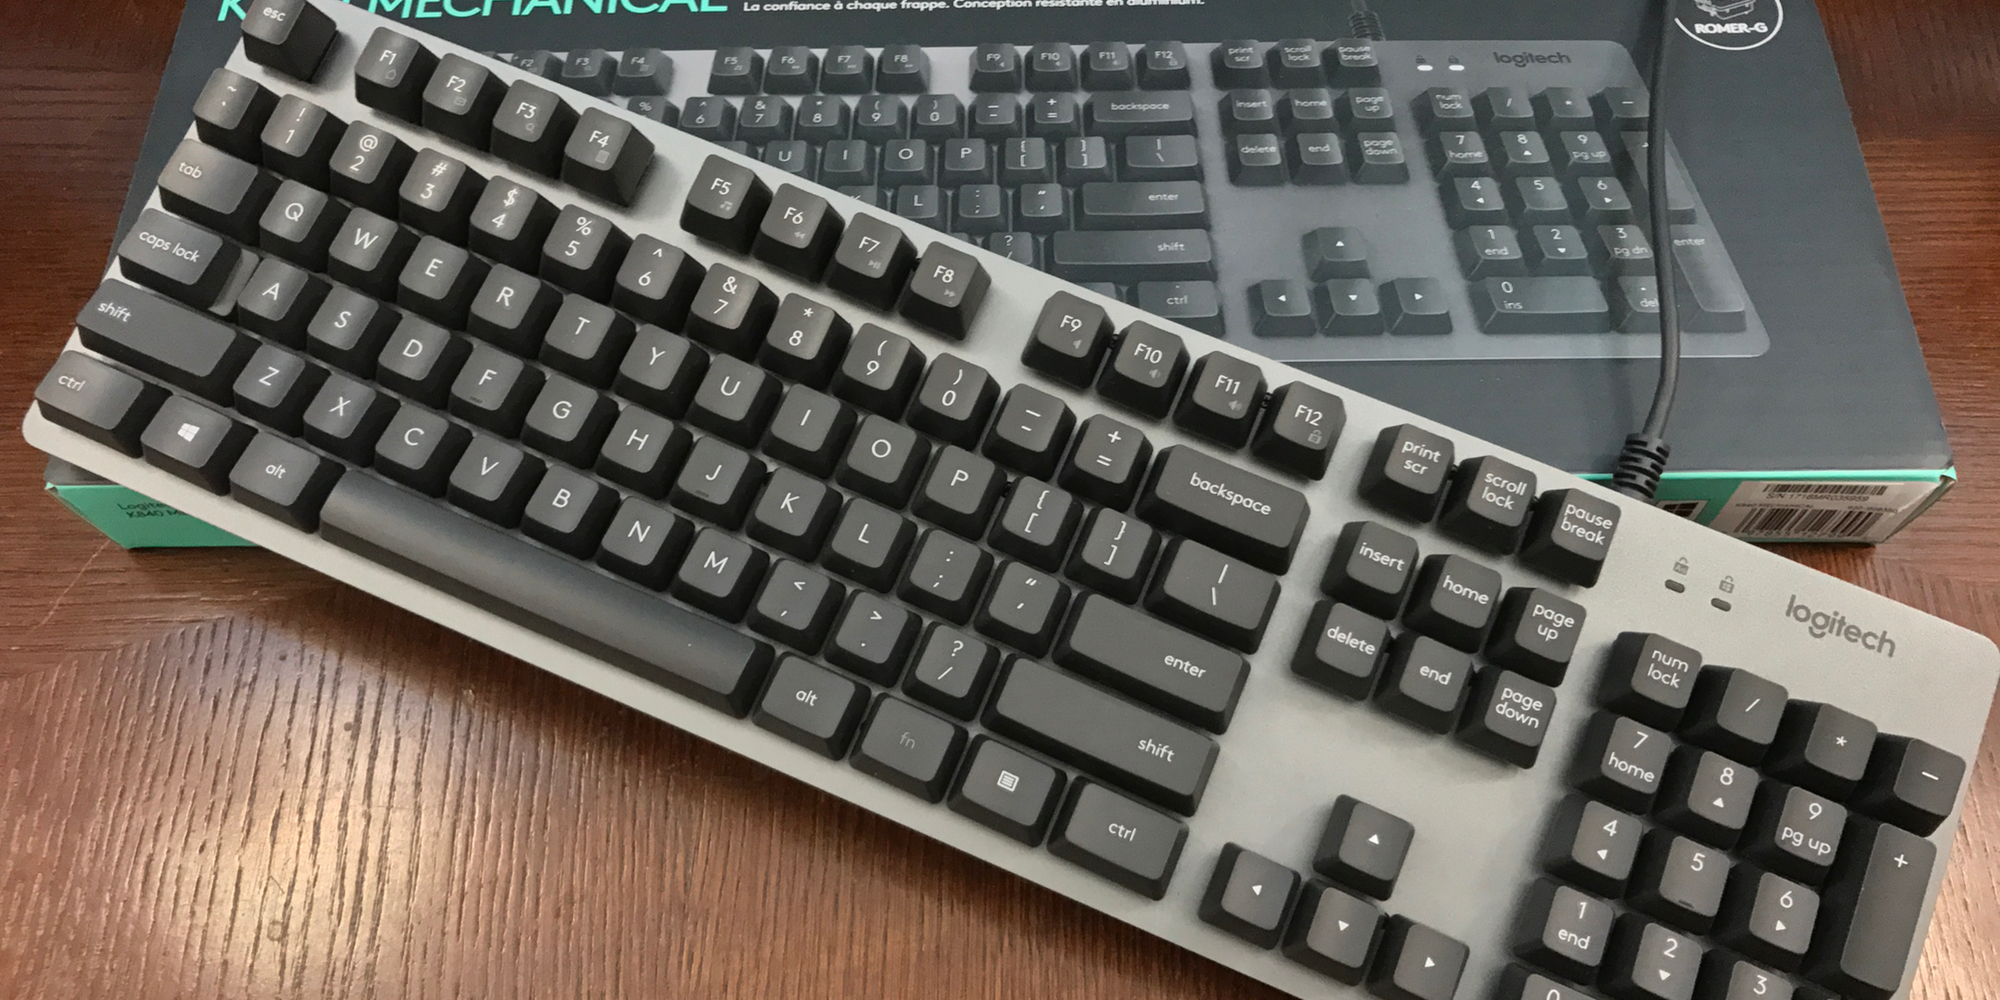 Logitech's is an affordable gateway to mechanical